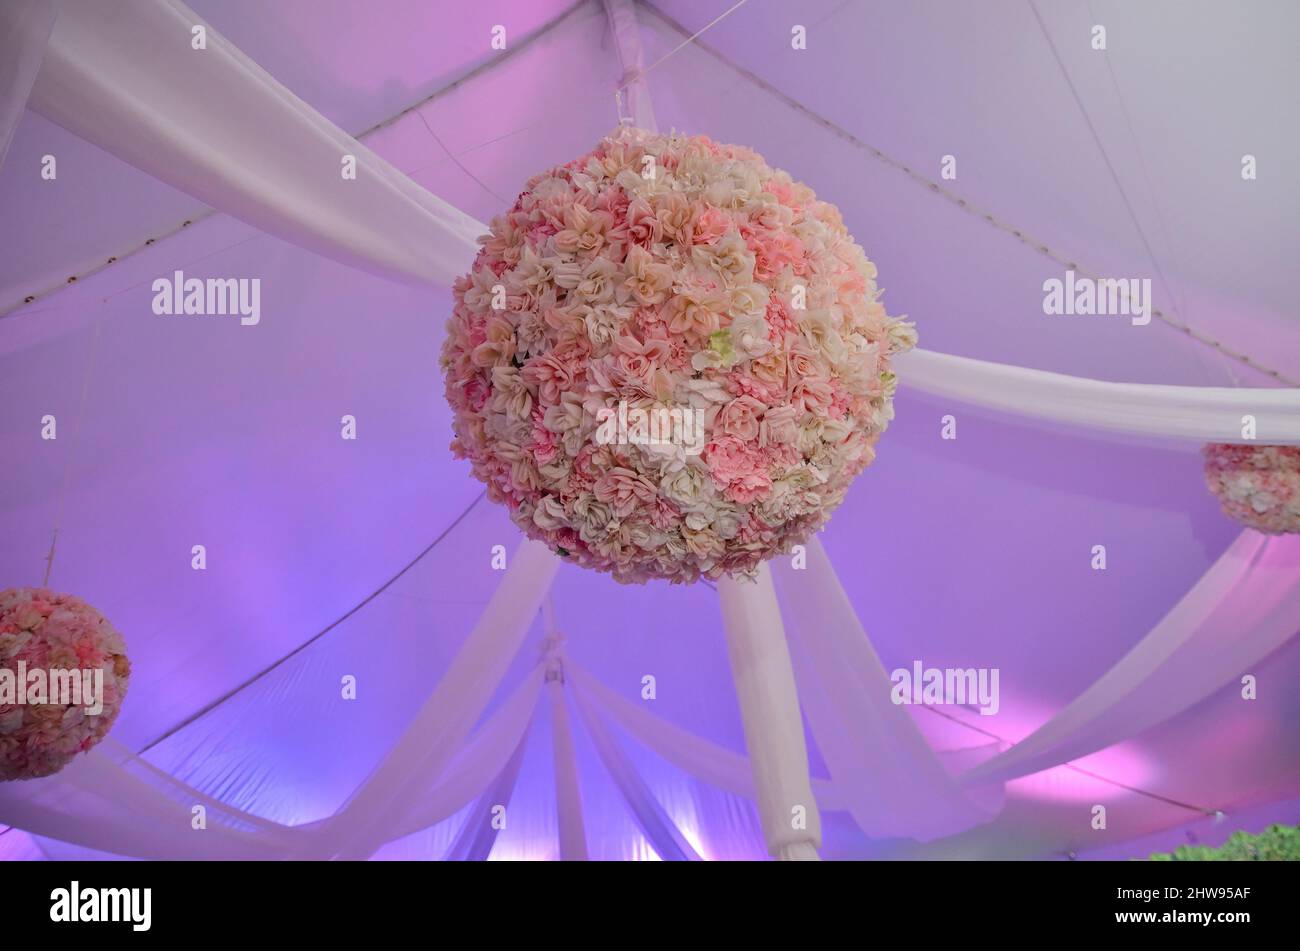 Rose Ball Decorations Lit with Purple and Pink Light Hanging From Ceiling of Large Event Tent Stock Photo